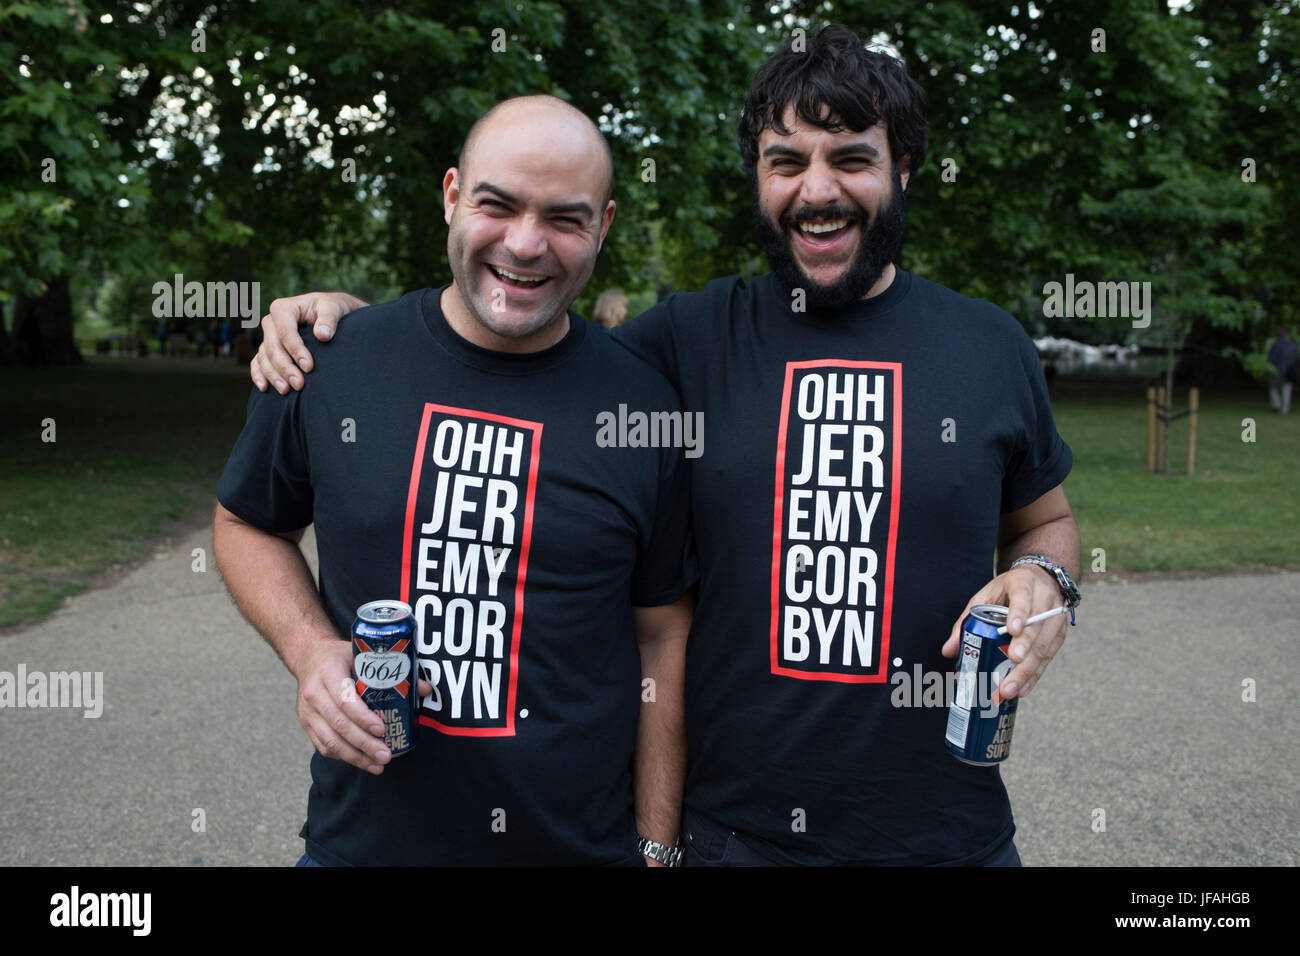 London, UK. 30th June, 2017. Jeremy Corbyn t-shirts sported by two friends at Theresa May's Leaving Drinks in St James's Park in London, England, United Kingdom. Following the General Election, there has been a great deal of dismay concerning the legitimacy of the Conservative government and Conservative plans for Brexit, and this has sparked events, which although a satirical leaving party, also a political statement of discontent. A precursor to larger demonstration in London the following day Credit: Michael Kemp/Alamy Live News Stock Photo